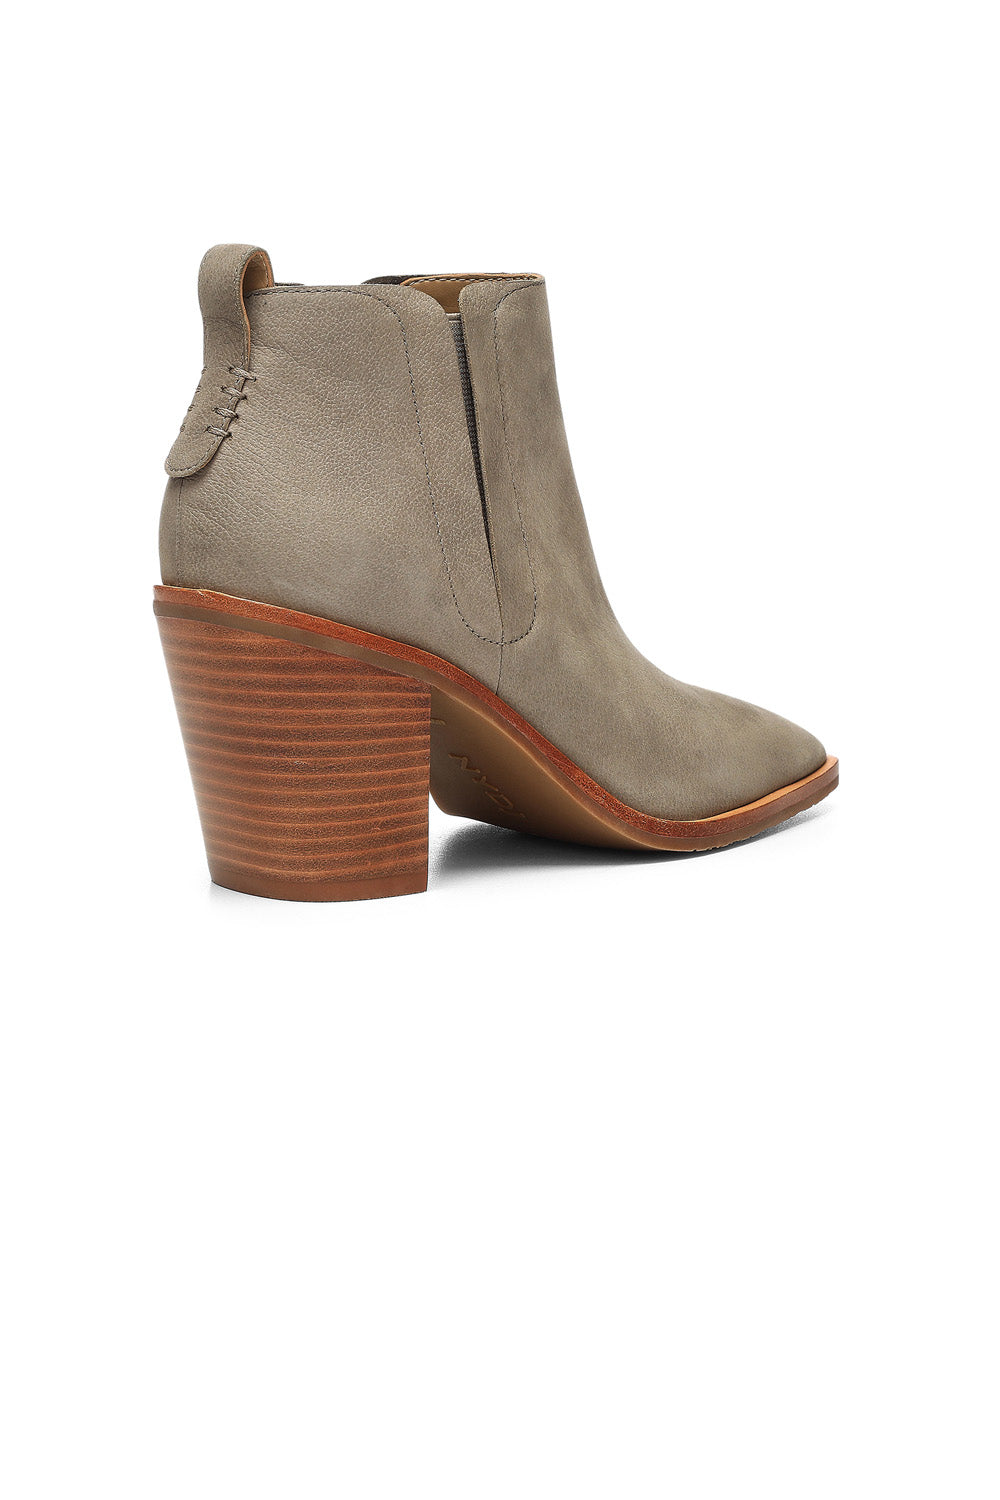 NYDJ Jolene Booties In Leather - Taupe